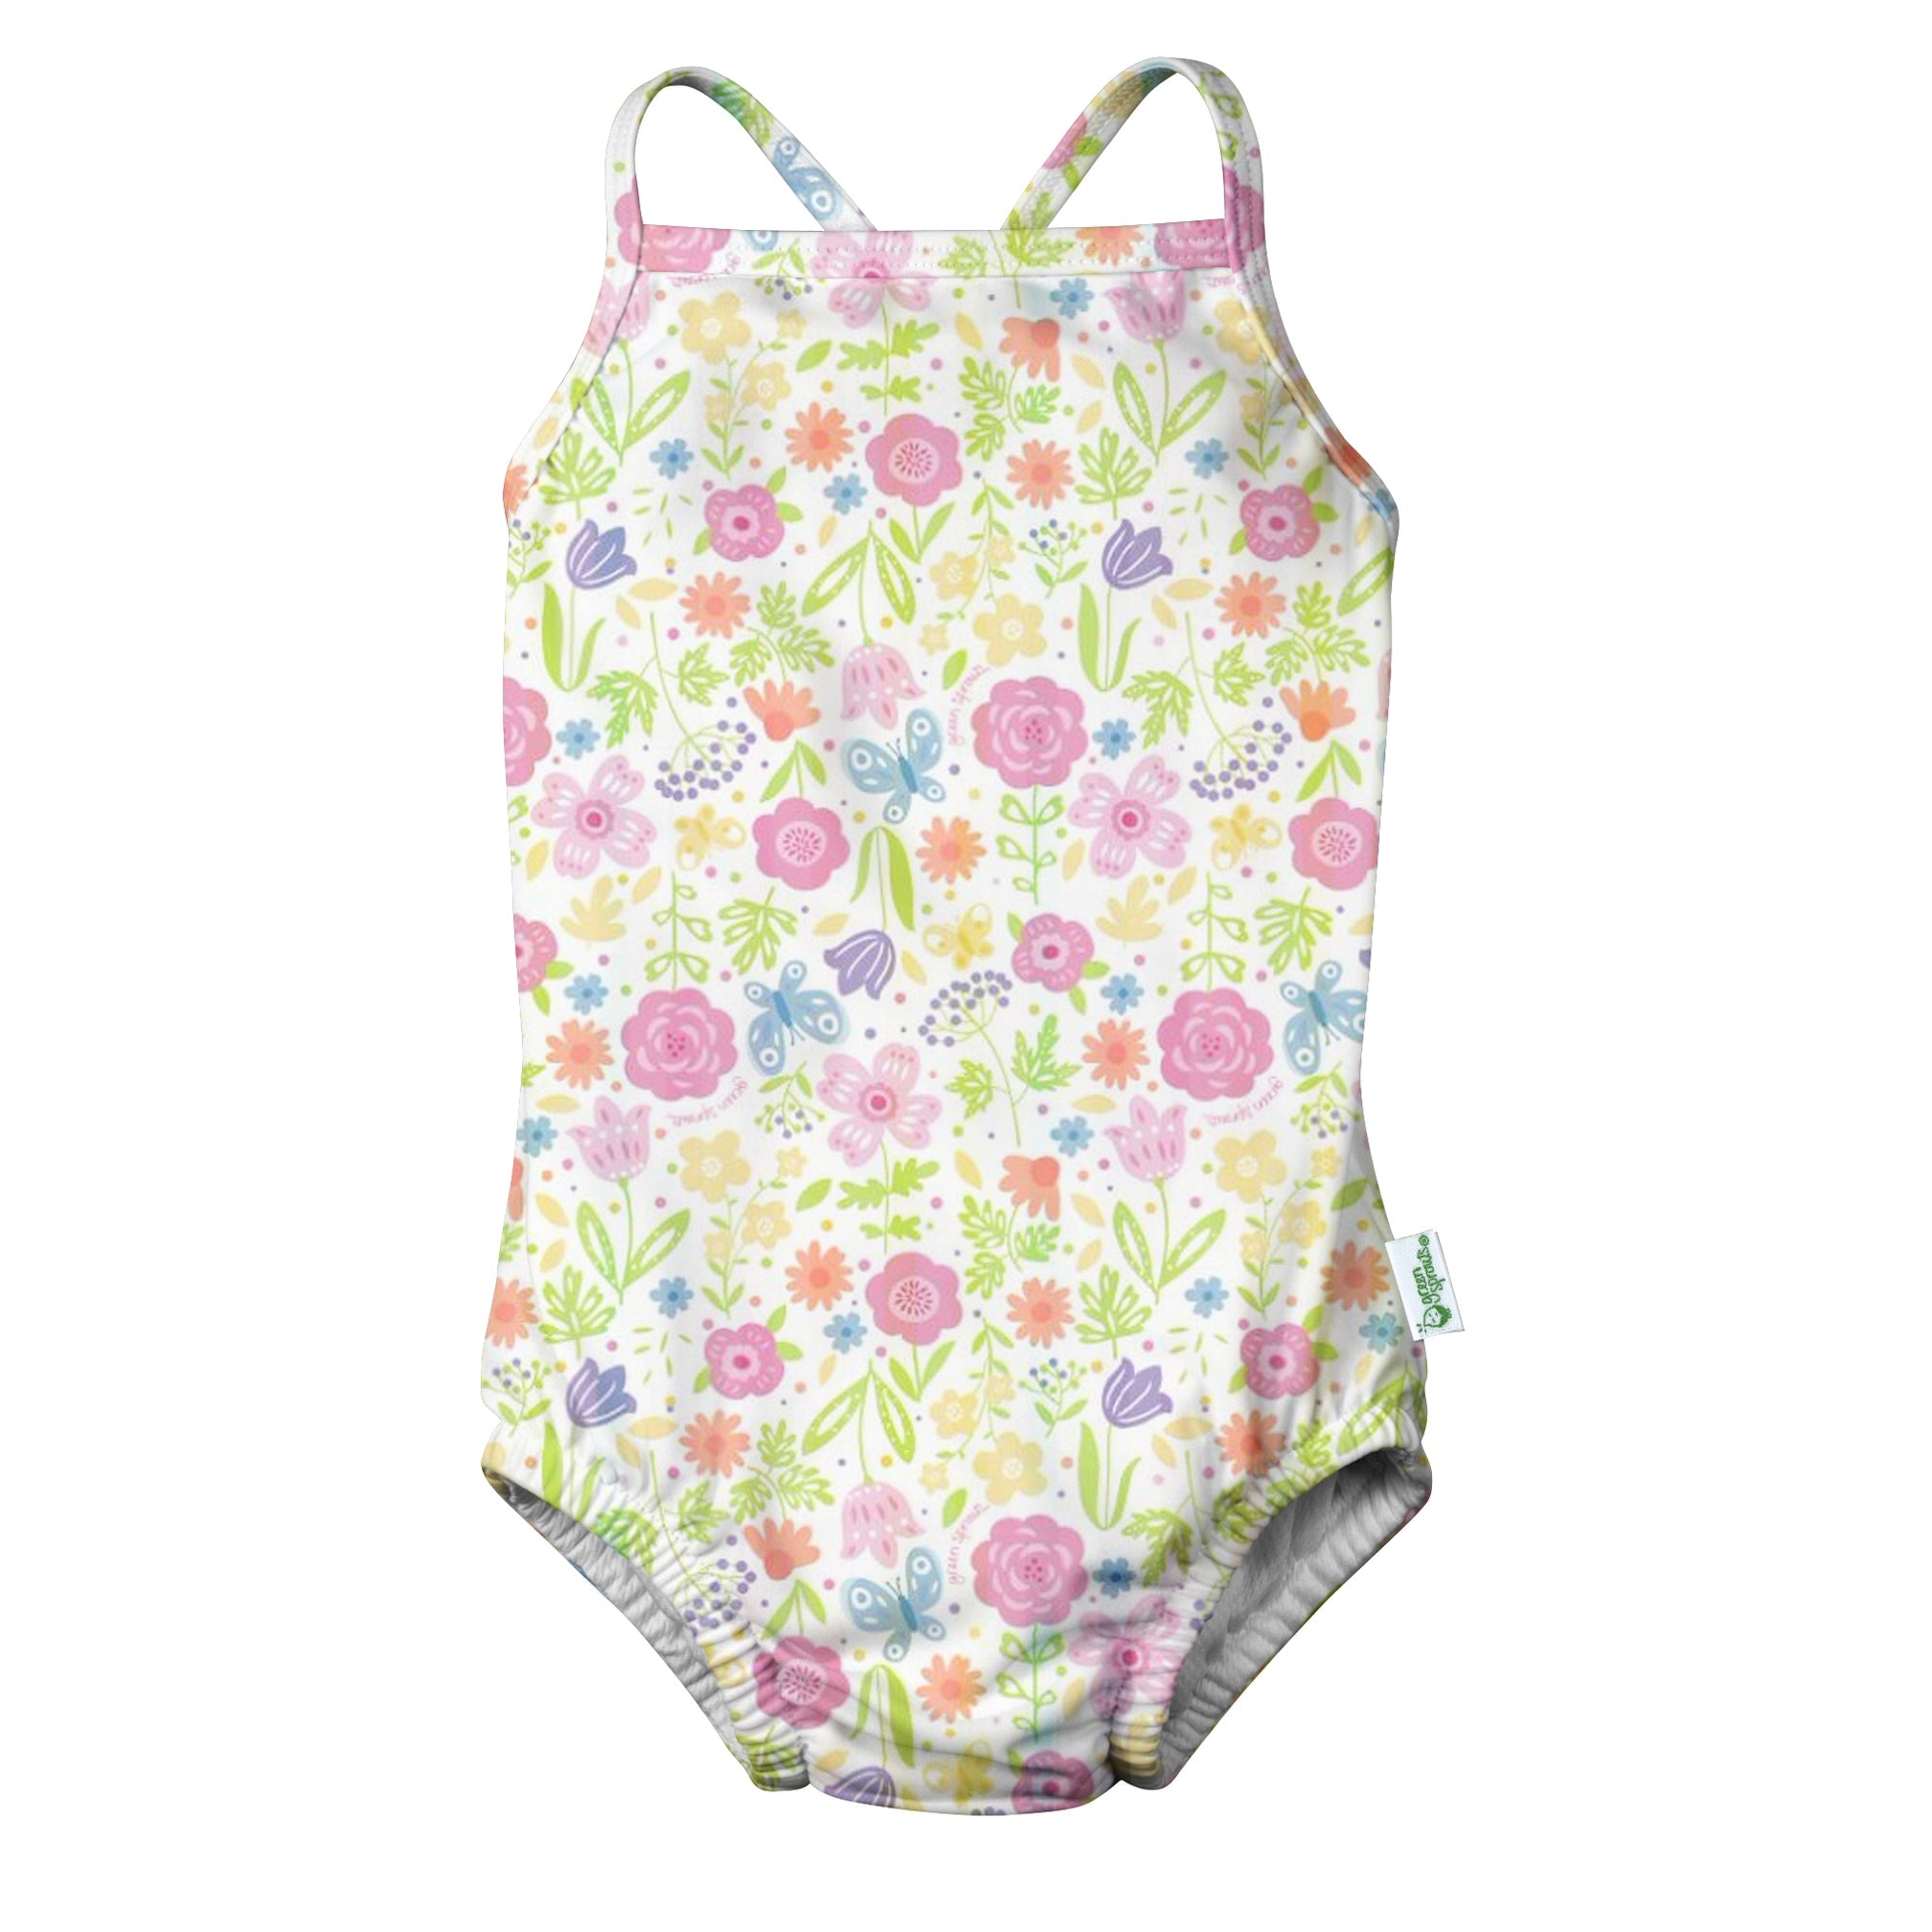 One-piece Classic Swimsuit with Built-in Reusable Absorbent Swim Diape